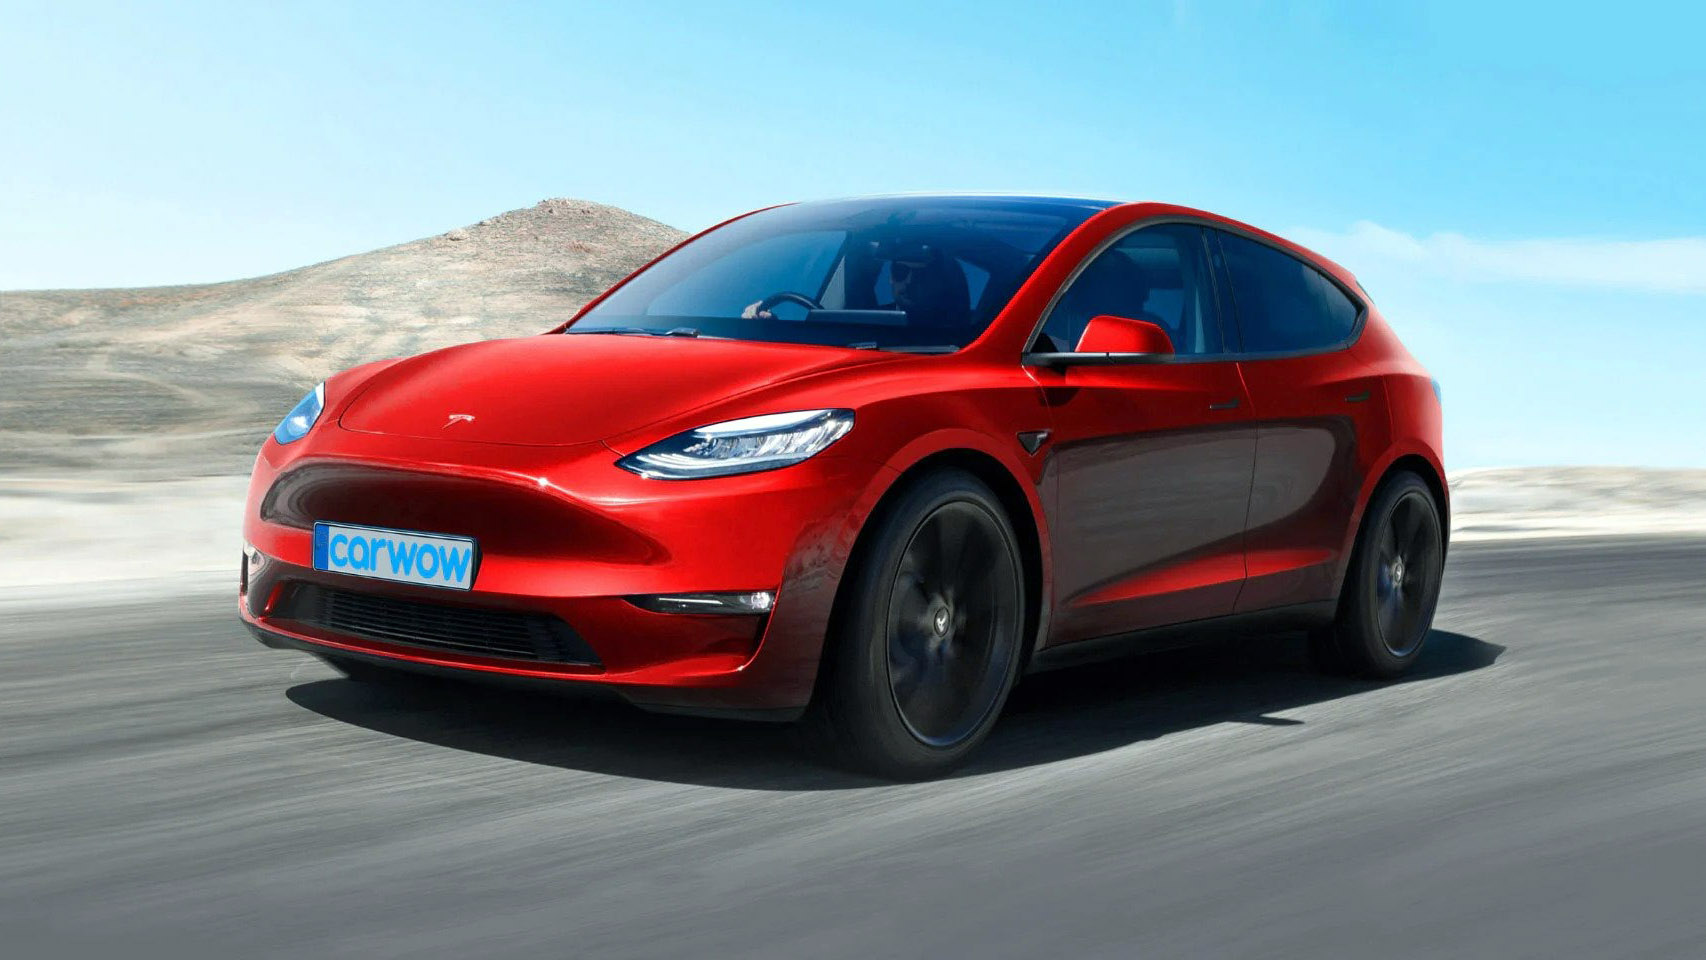 Smaller and cheaper Tesla Model 2 priced at half of the Model 3